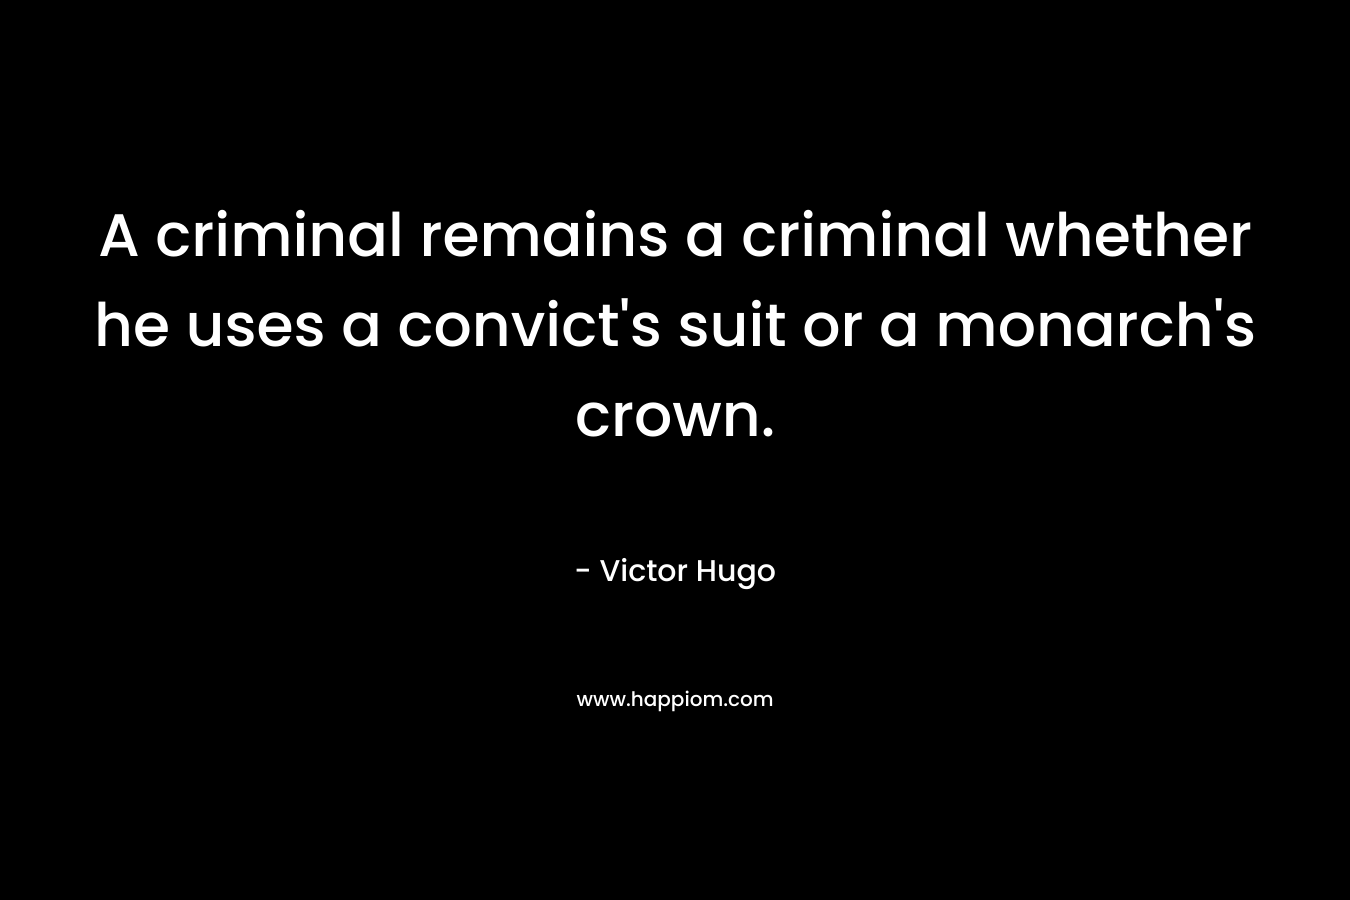 A criminal remains a criminal whether he uses a convict's suit or a monarch's crown.